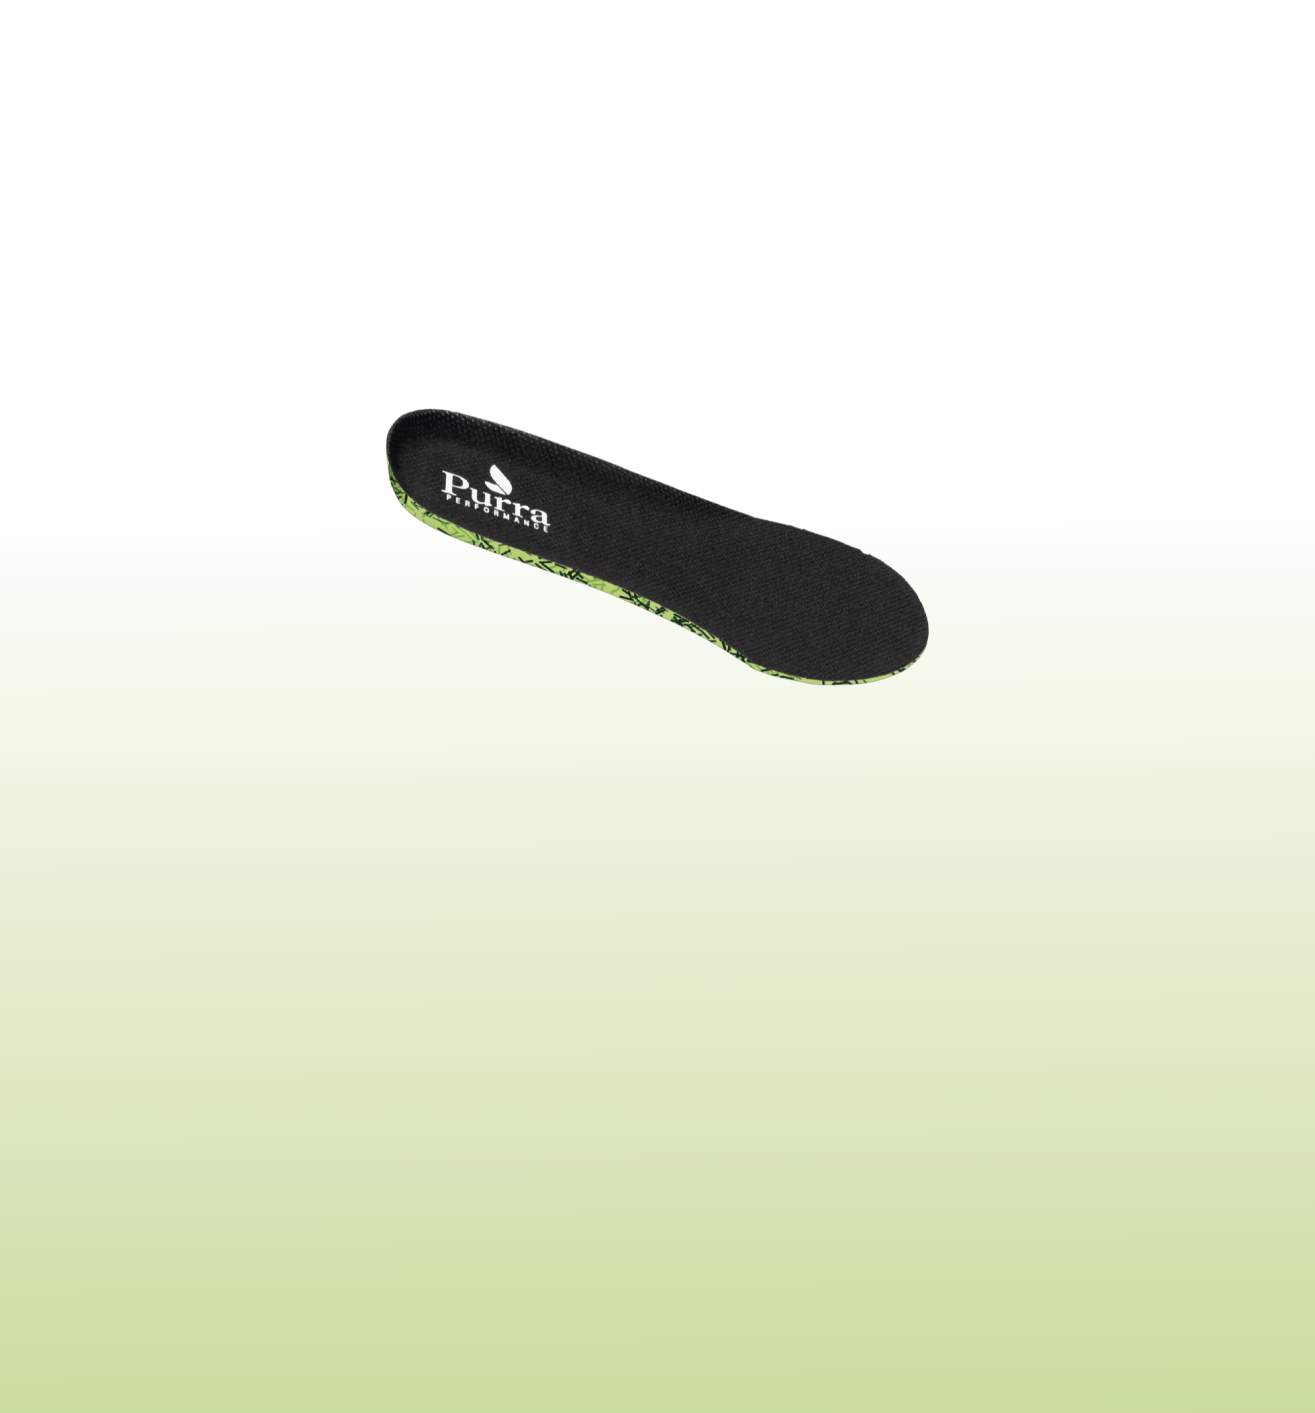 The recycled material EVA/PU insole.  With a black upper and black and green camo style lower, shown on a gradiated white to pale green background.  The Purra logo is shown on the heel area.